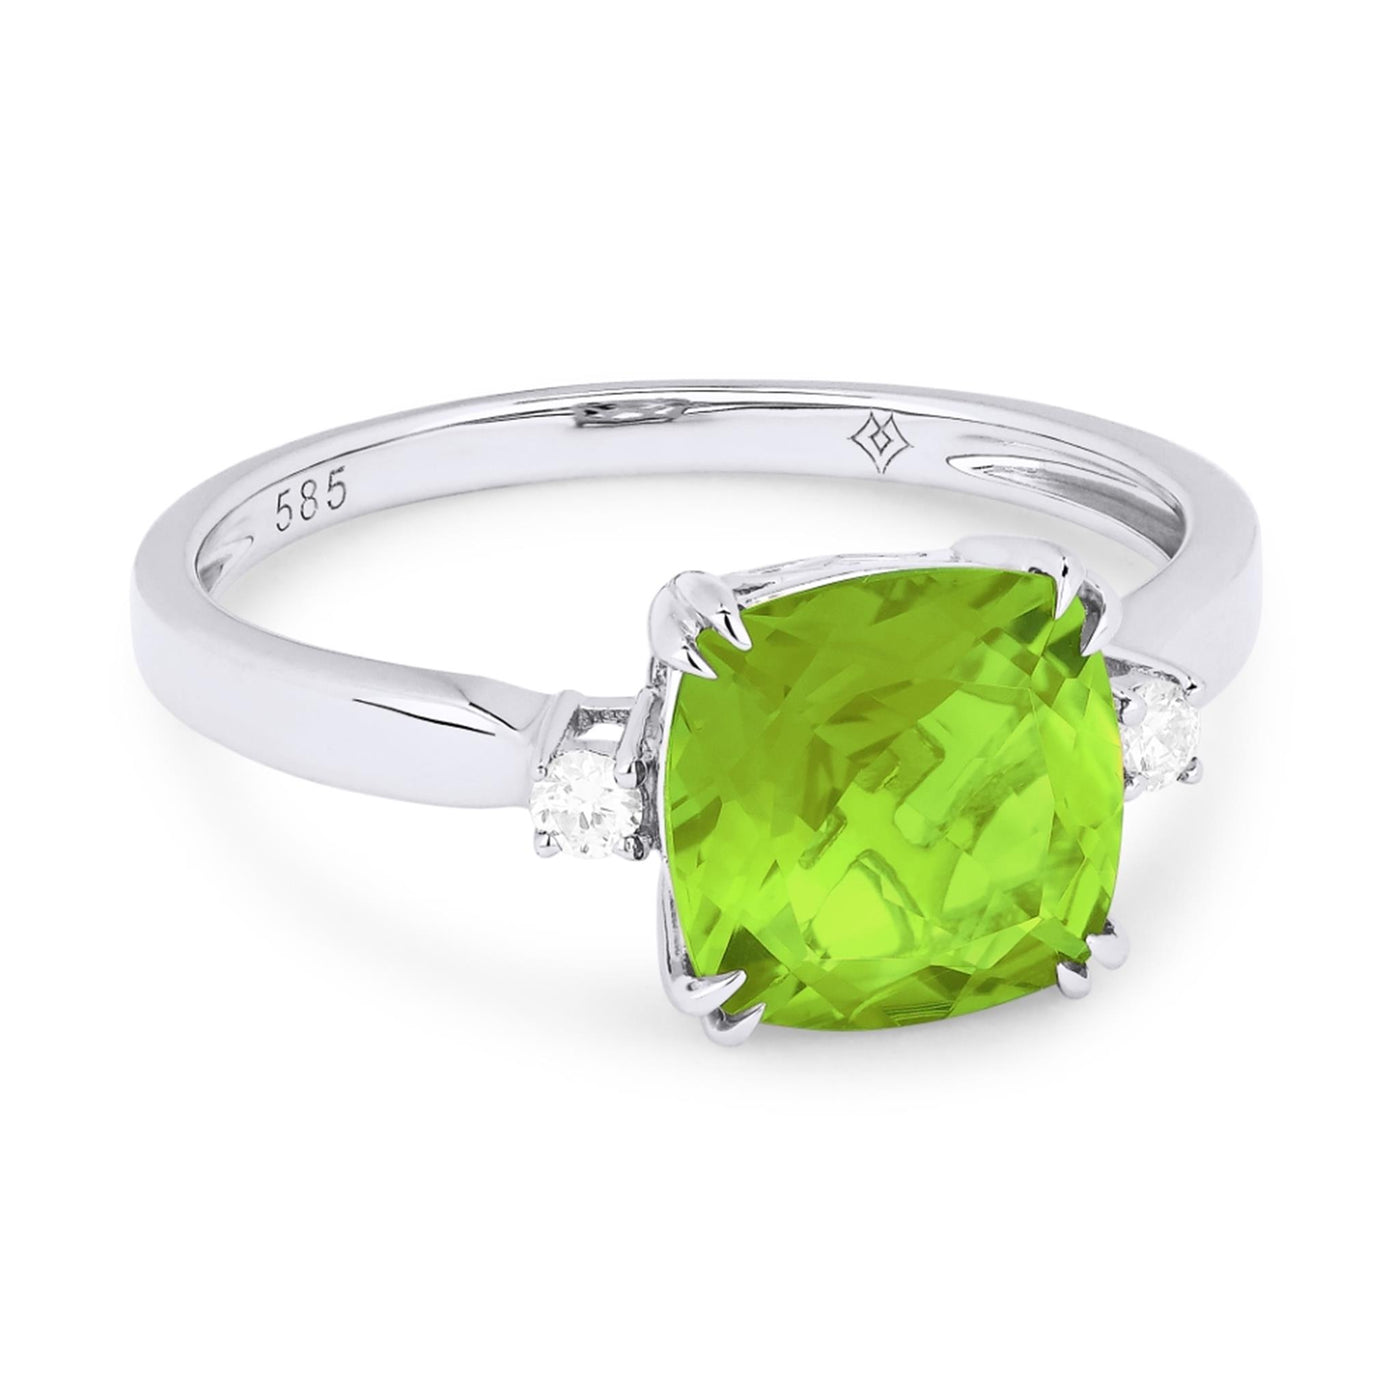 Madison L 14K White Gold 2.43ctw Traditional Style Peridot and Diamonds Ring